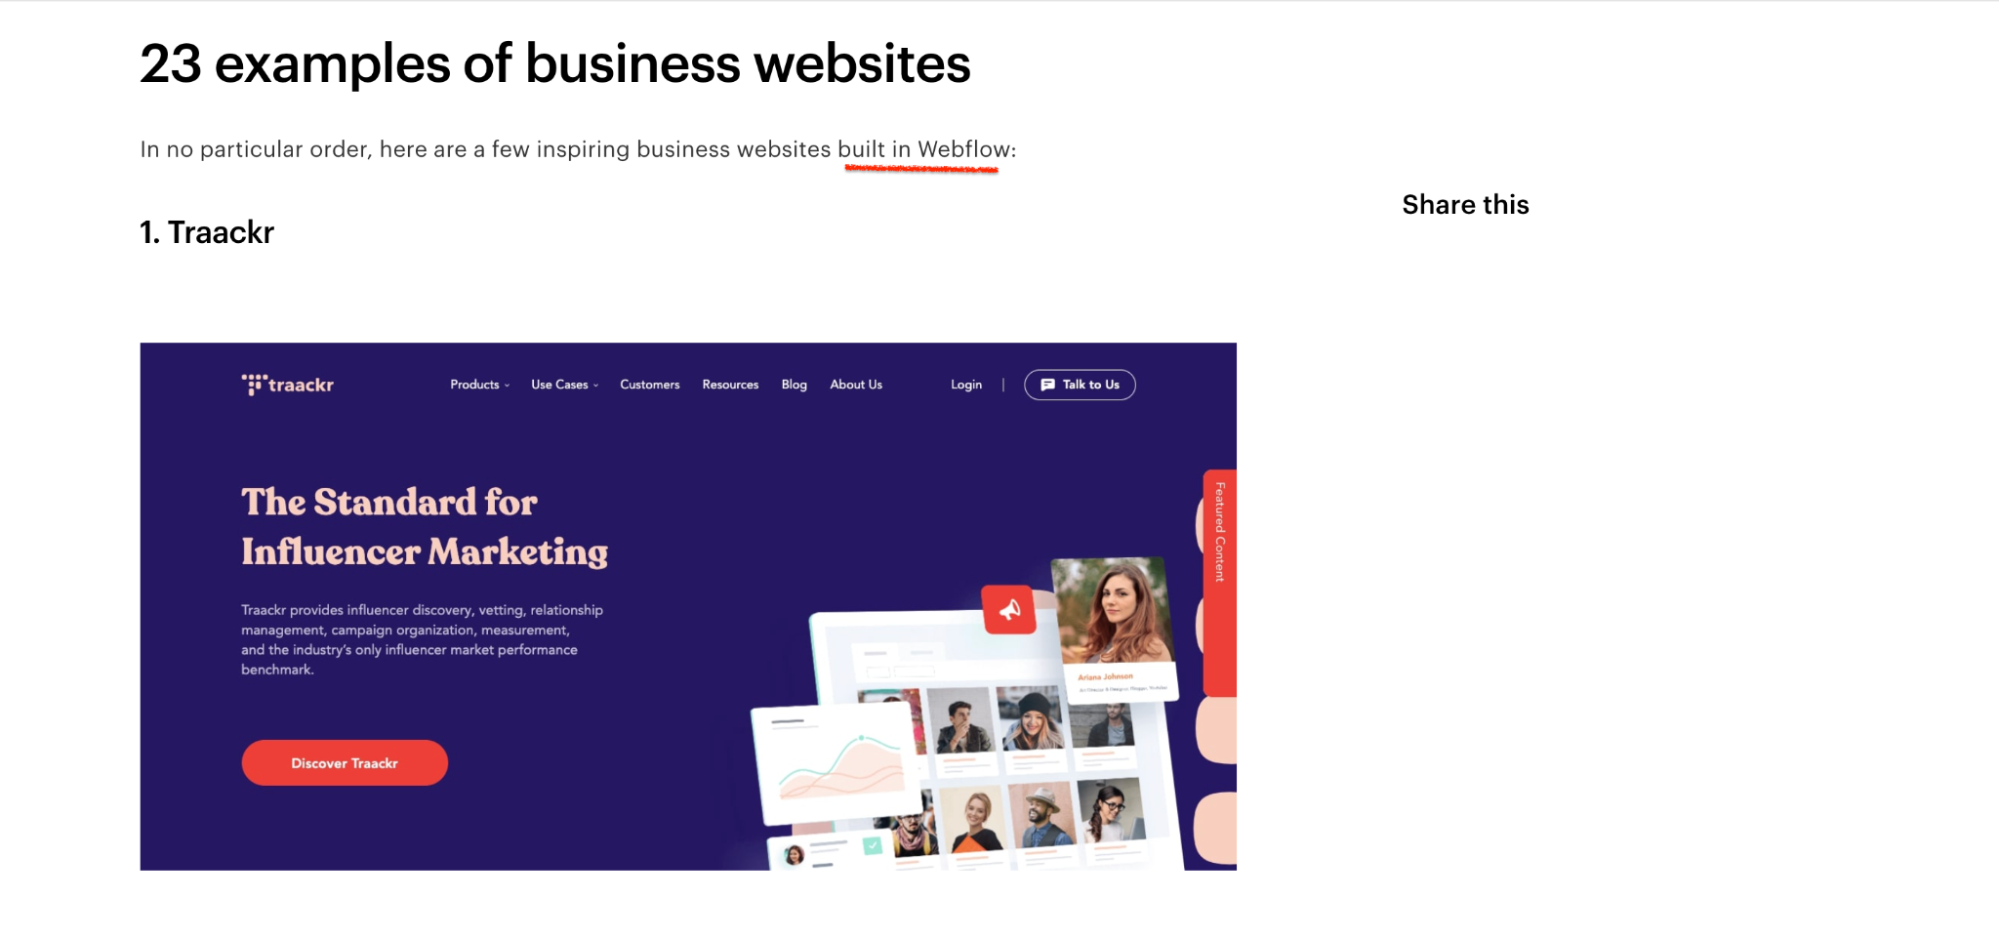 blog post of "23 examples of business websites" built in Webflow